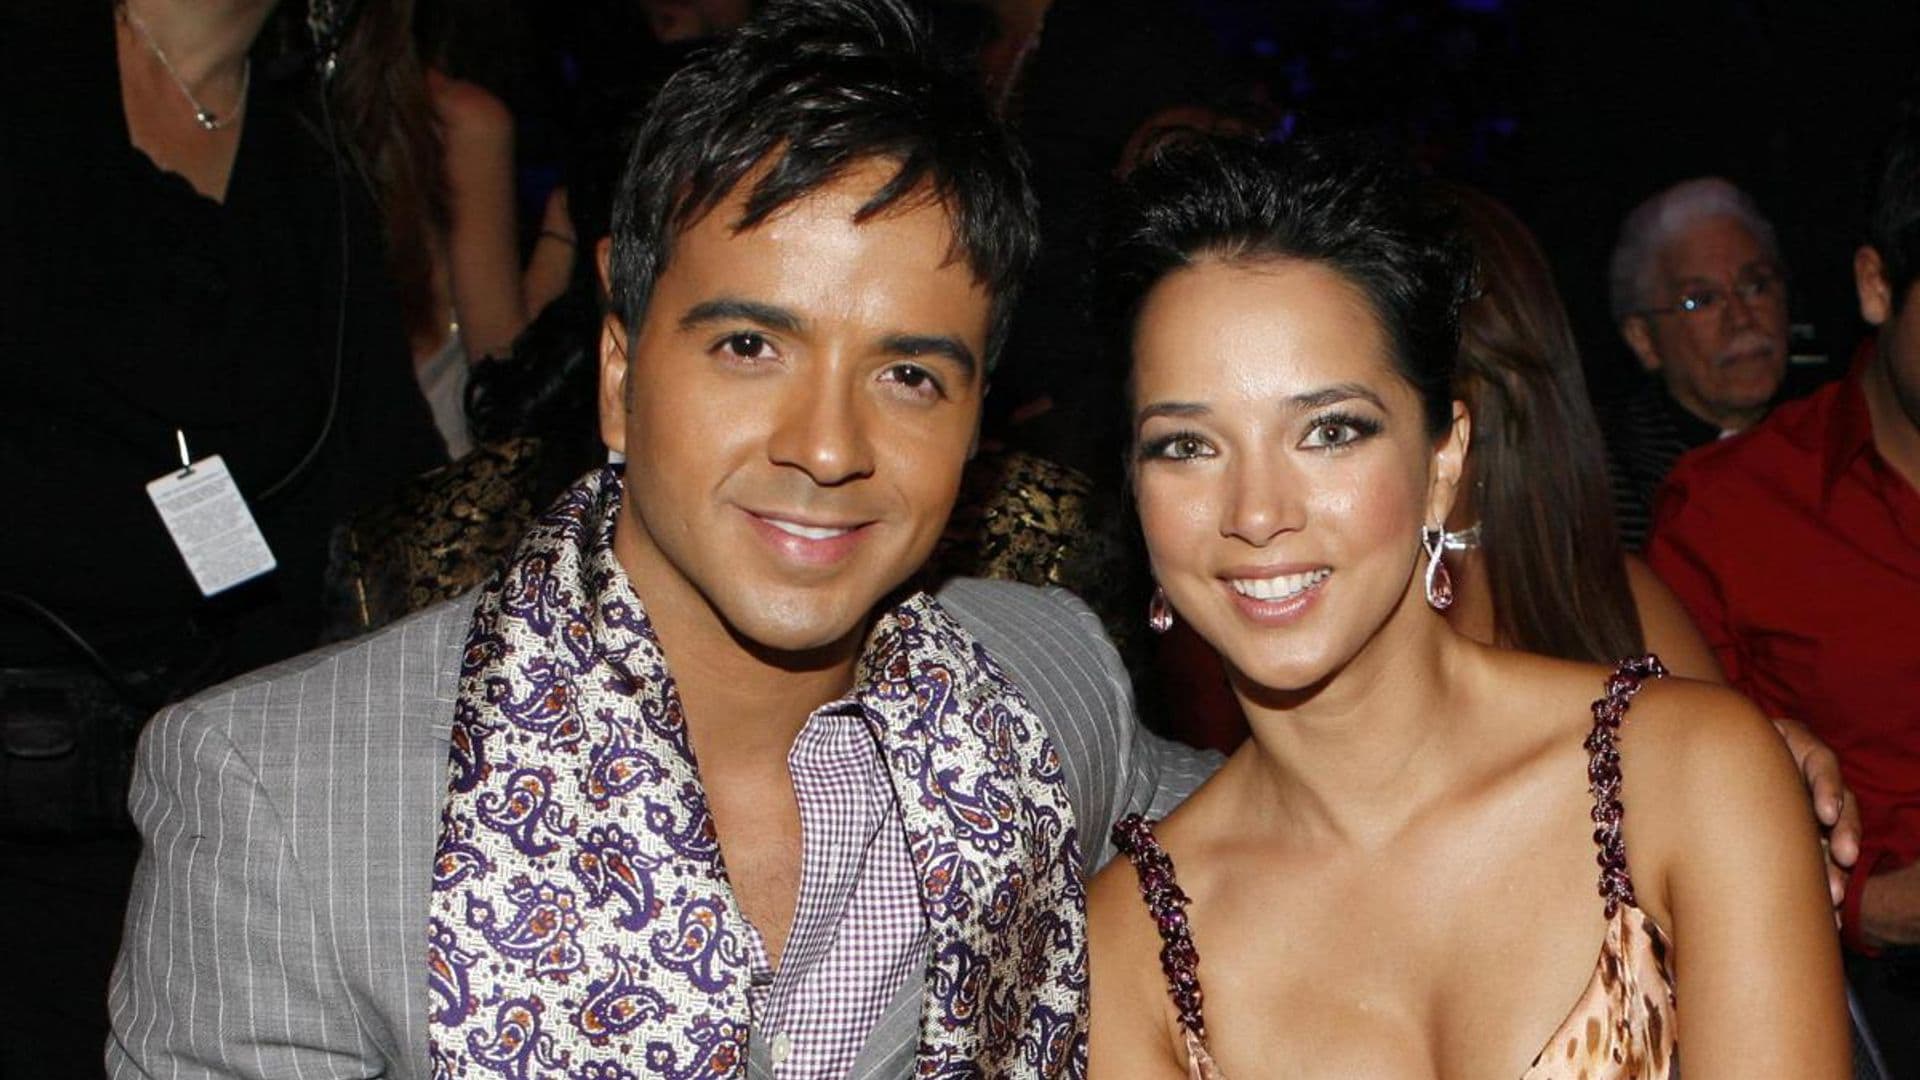 Luis Fonsi talks about his divorce from Adamari López in a rare interview